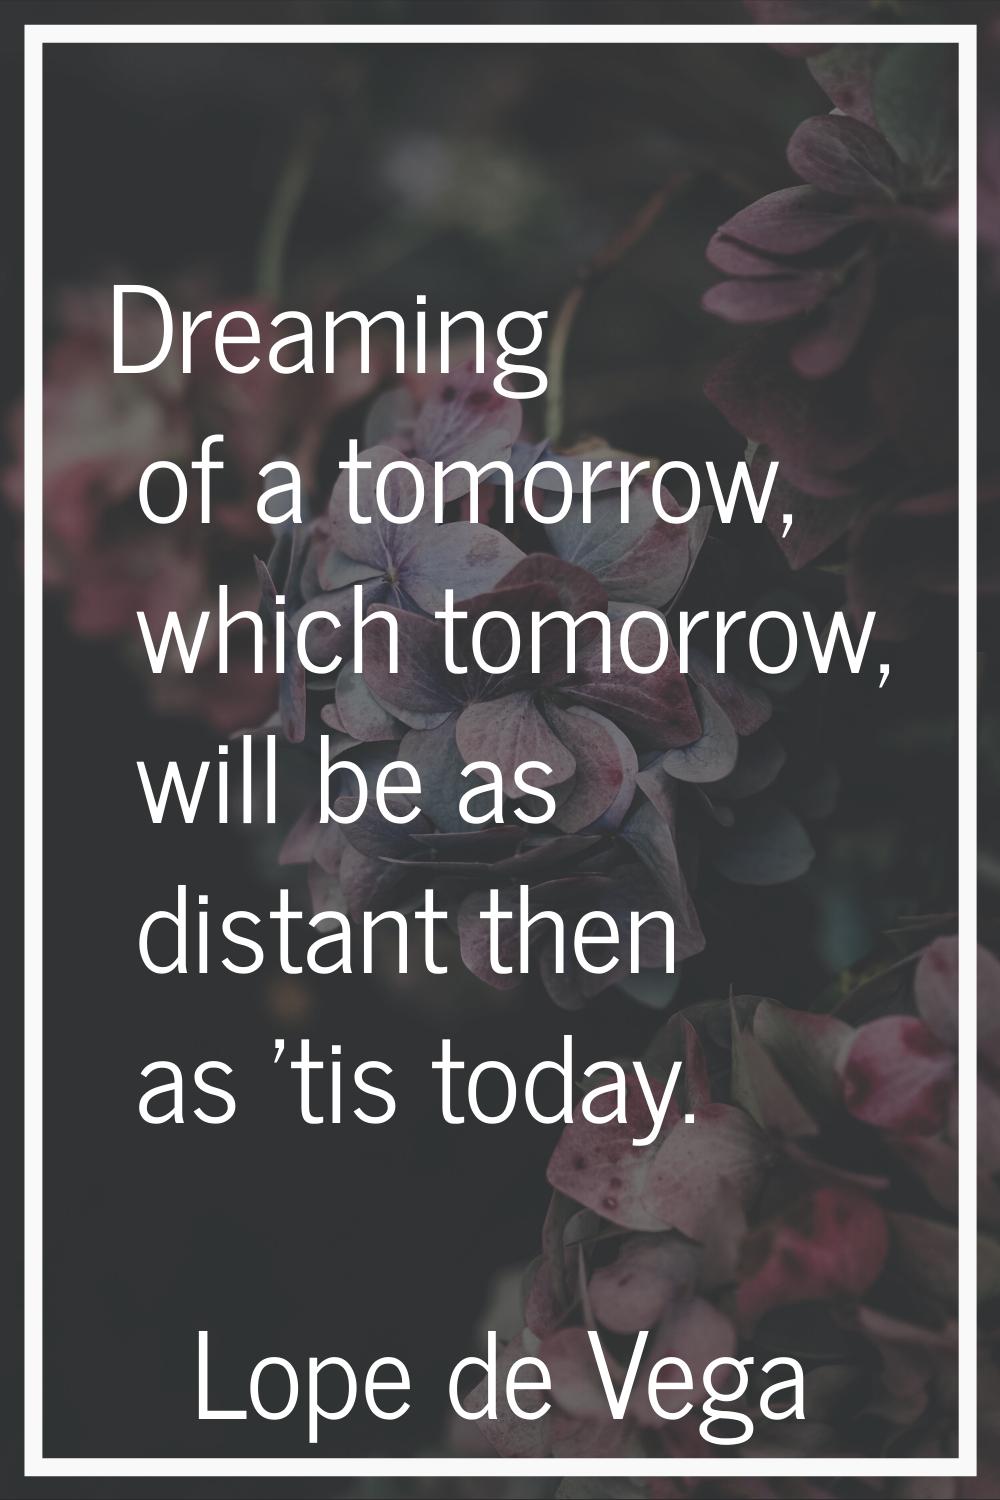 Dreaming of a tomorrow, which tomorrow, will be as distant then as 'tis today.